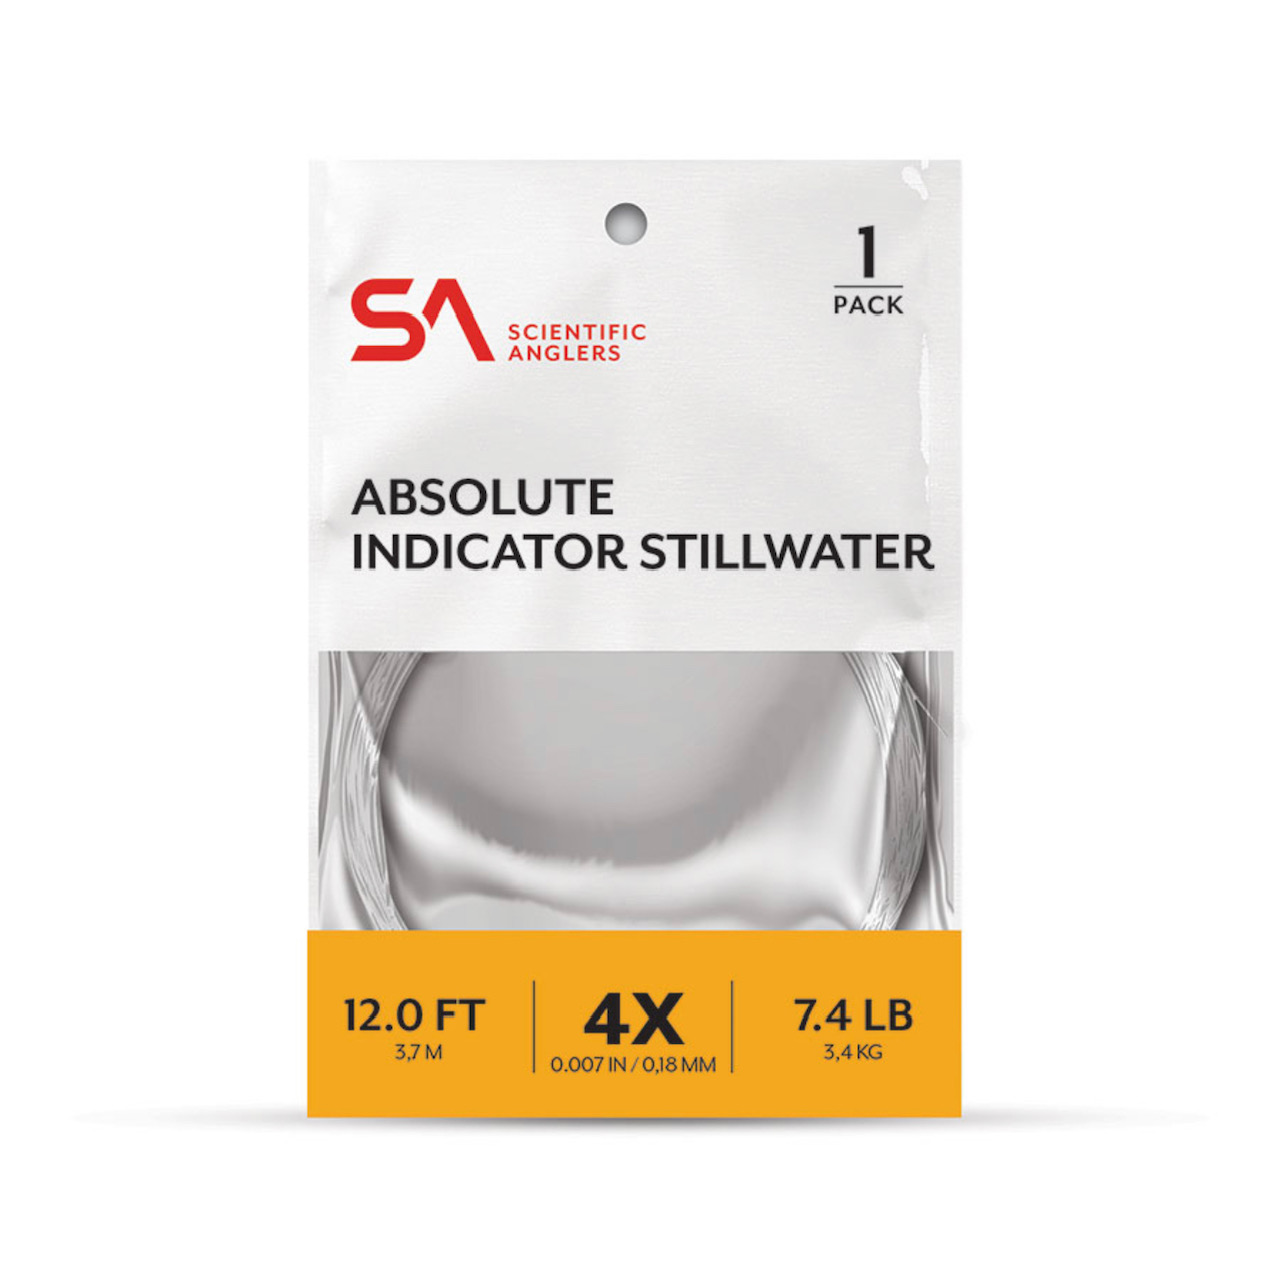 Scientific Anglers Absolute Indicator Stillwater - 12ft - 4X - 7.4lb